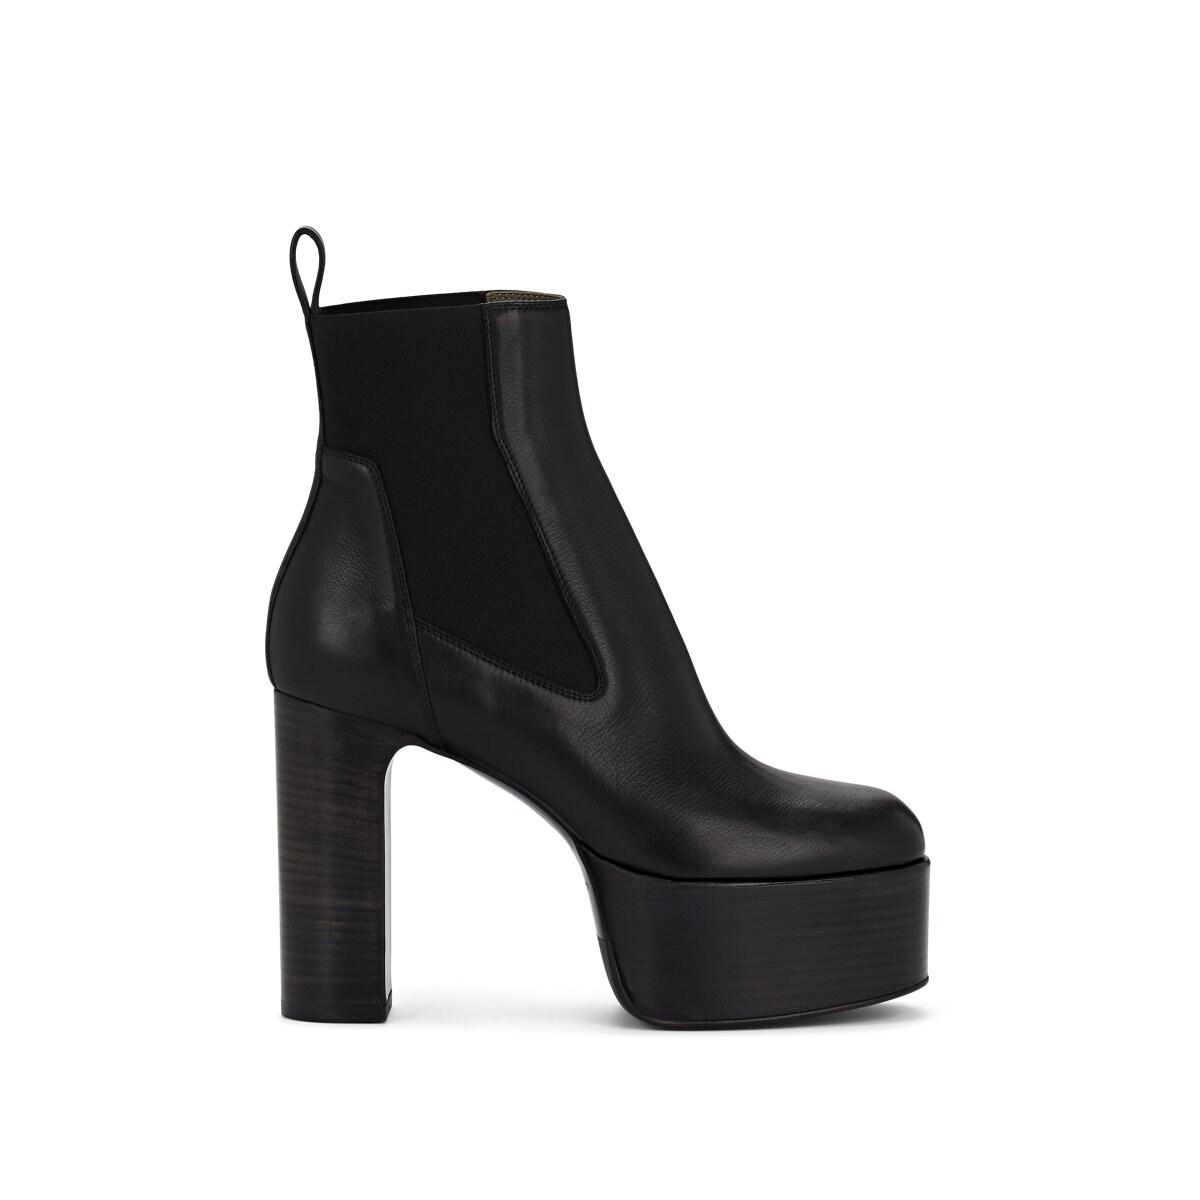 Rick Owens Leather Kiss 125mm Ankle Boots in Black - Save 11% - Lyst